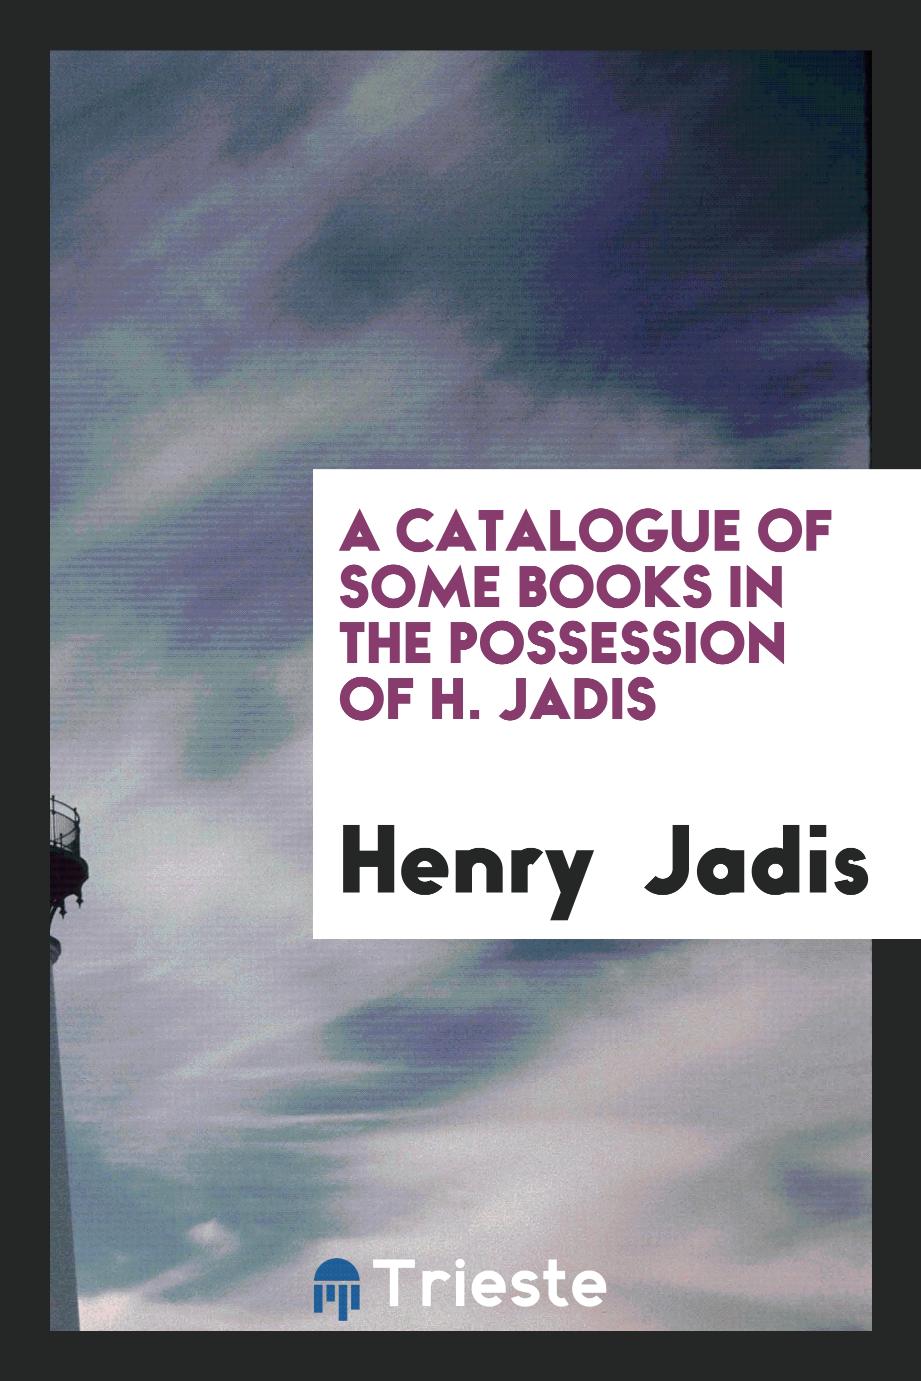 A catalogue of some books in the possession of H. Jadis